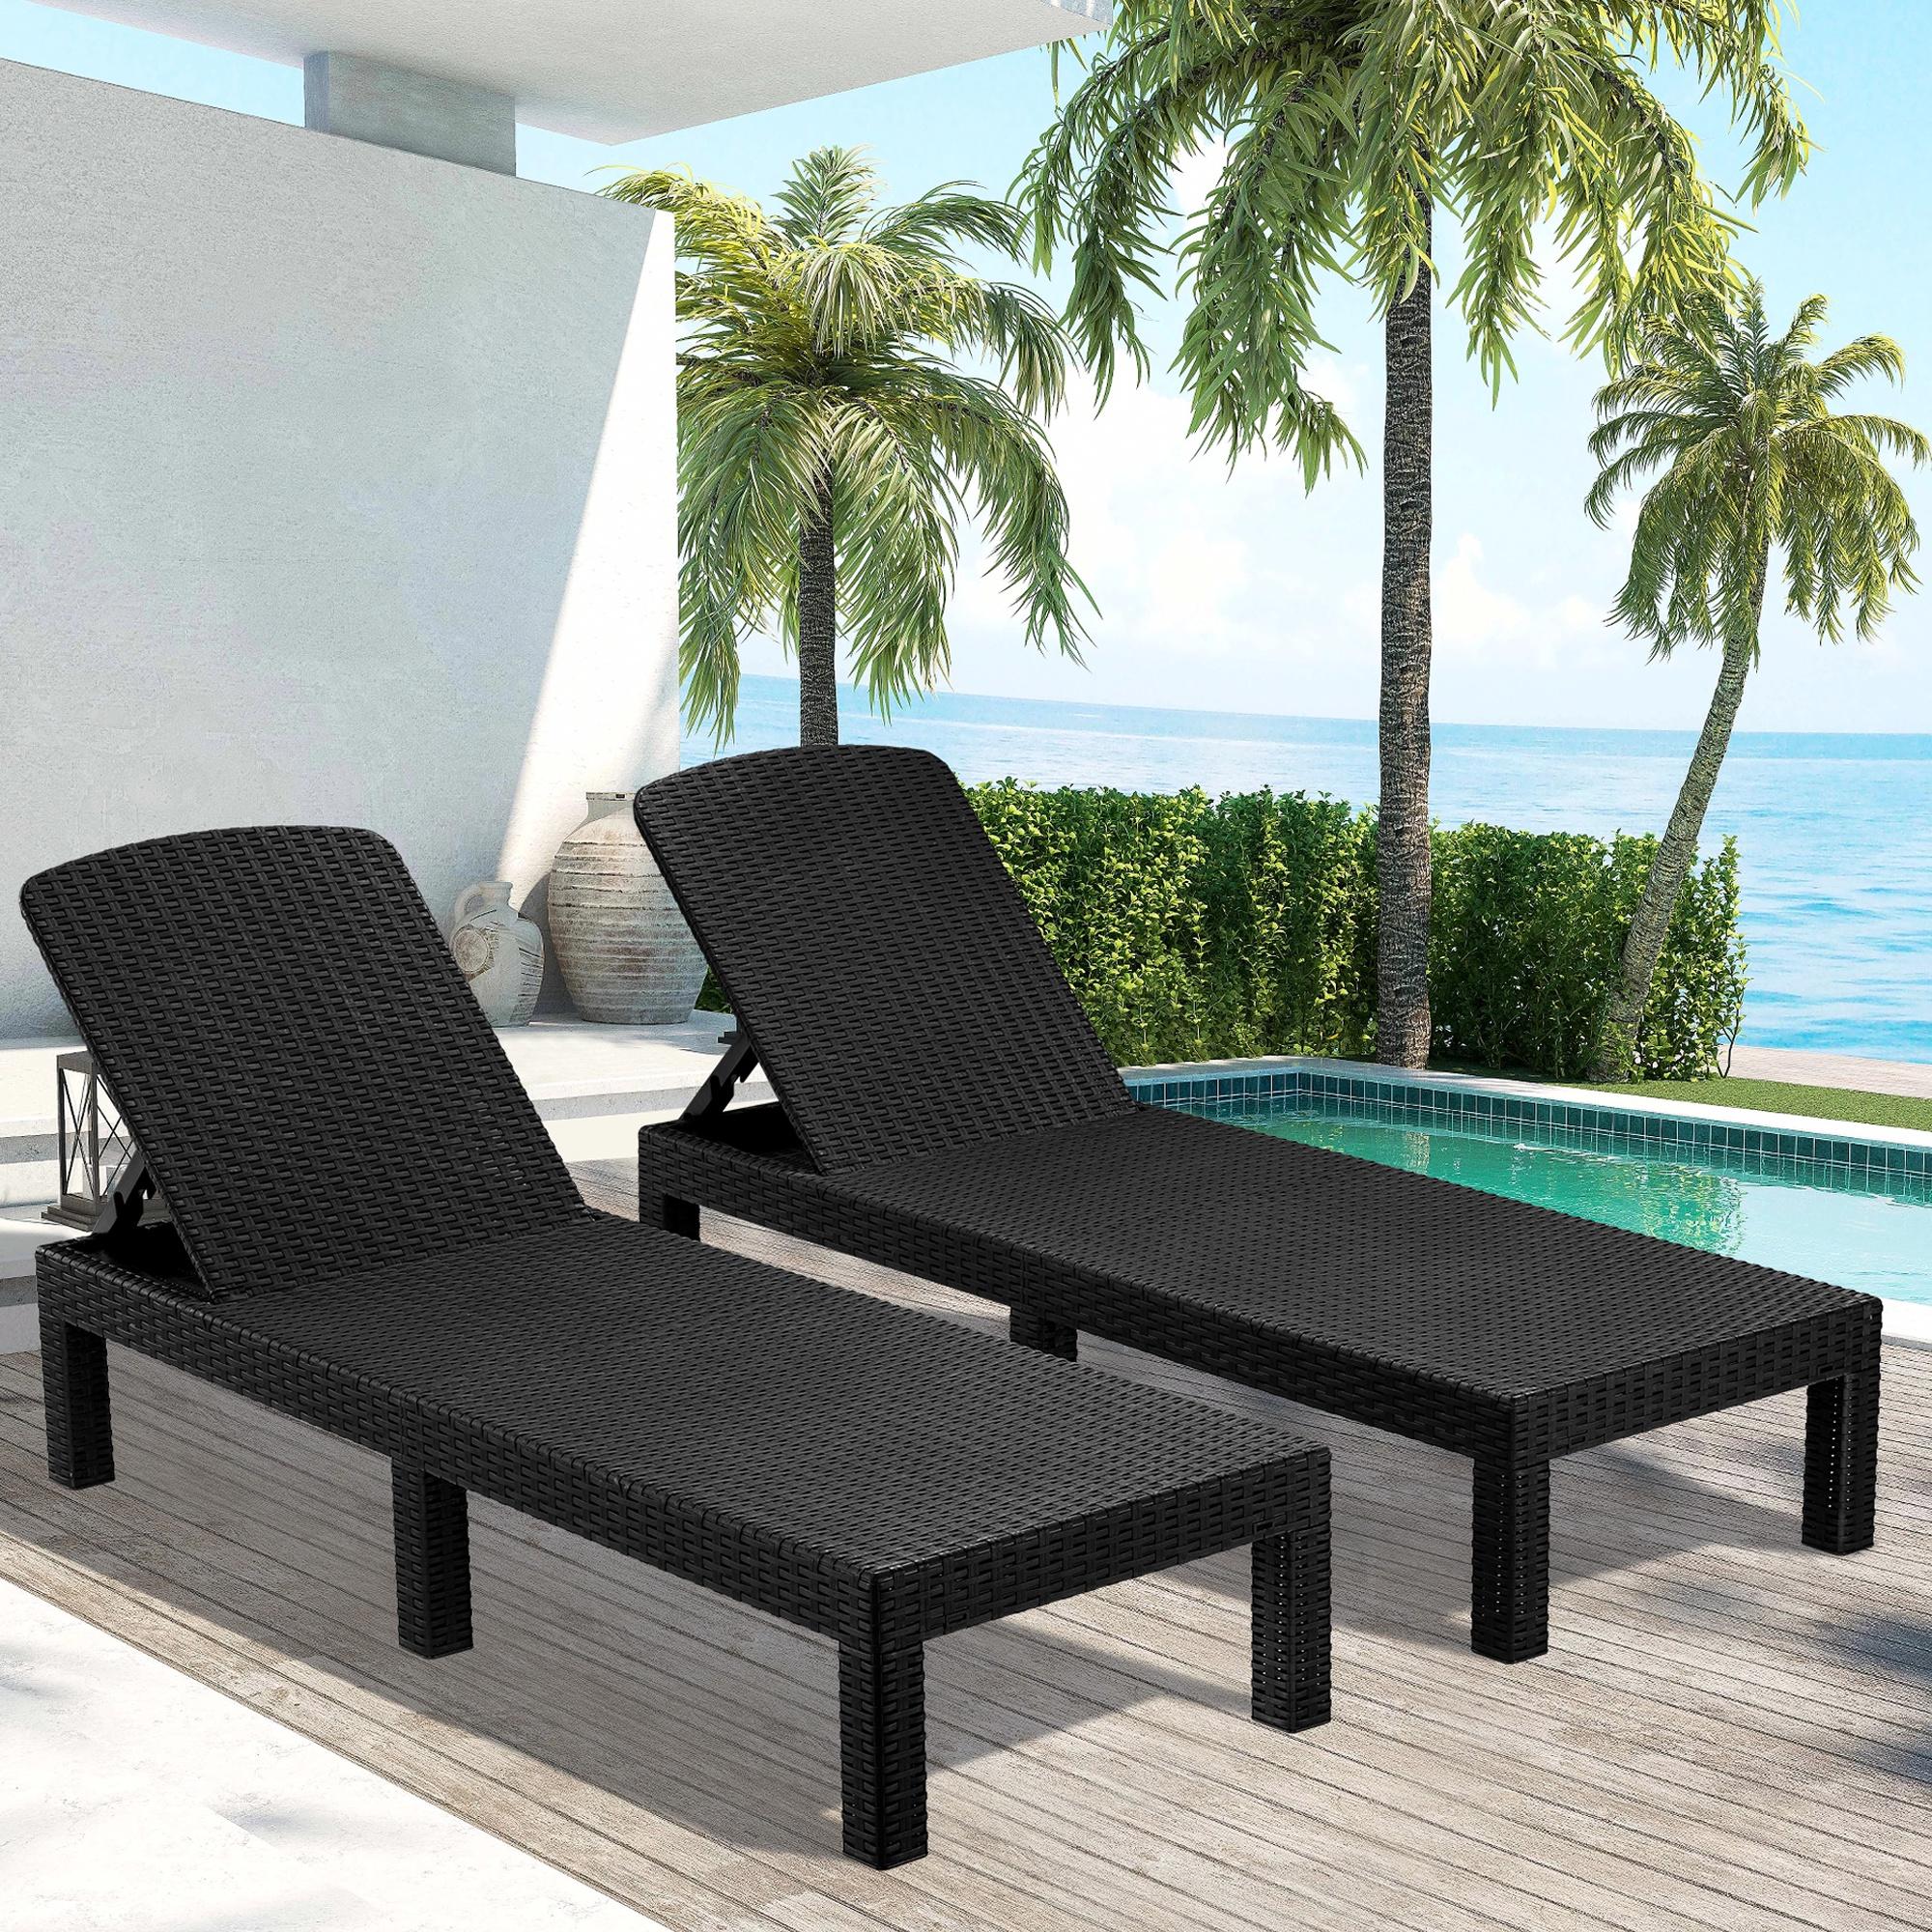 Syngar Chaise Lounge Set of 2, Patio Reclining Lounge Chairs with Adjustable Backrest, Outdoor All-Weather PP Resin Sun Loungers for Backyard, Poolside, Porch, Garden, Black - image 1 of 10